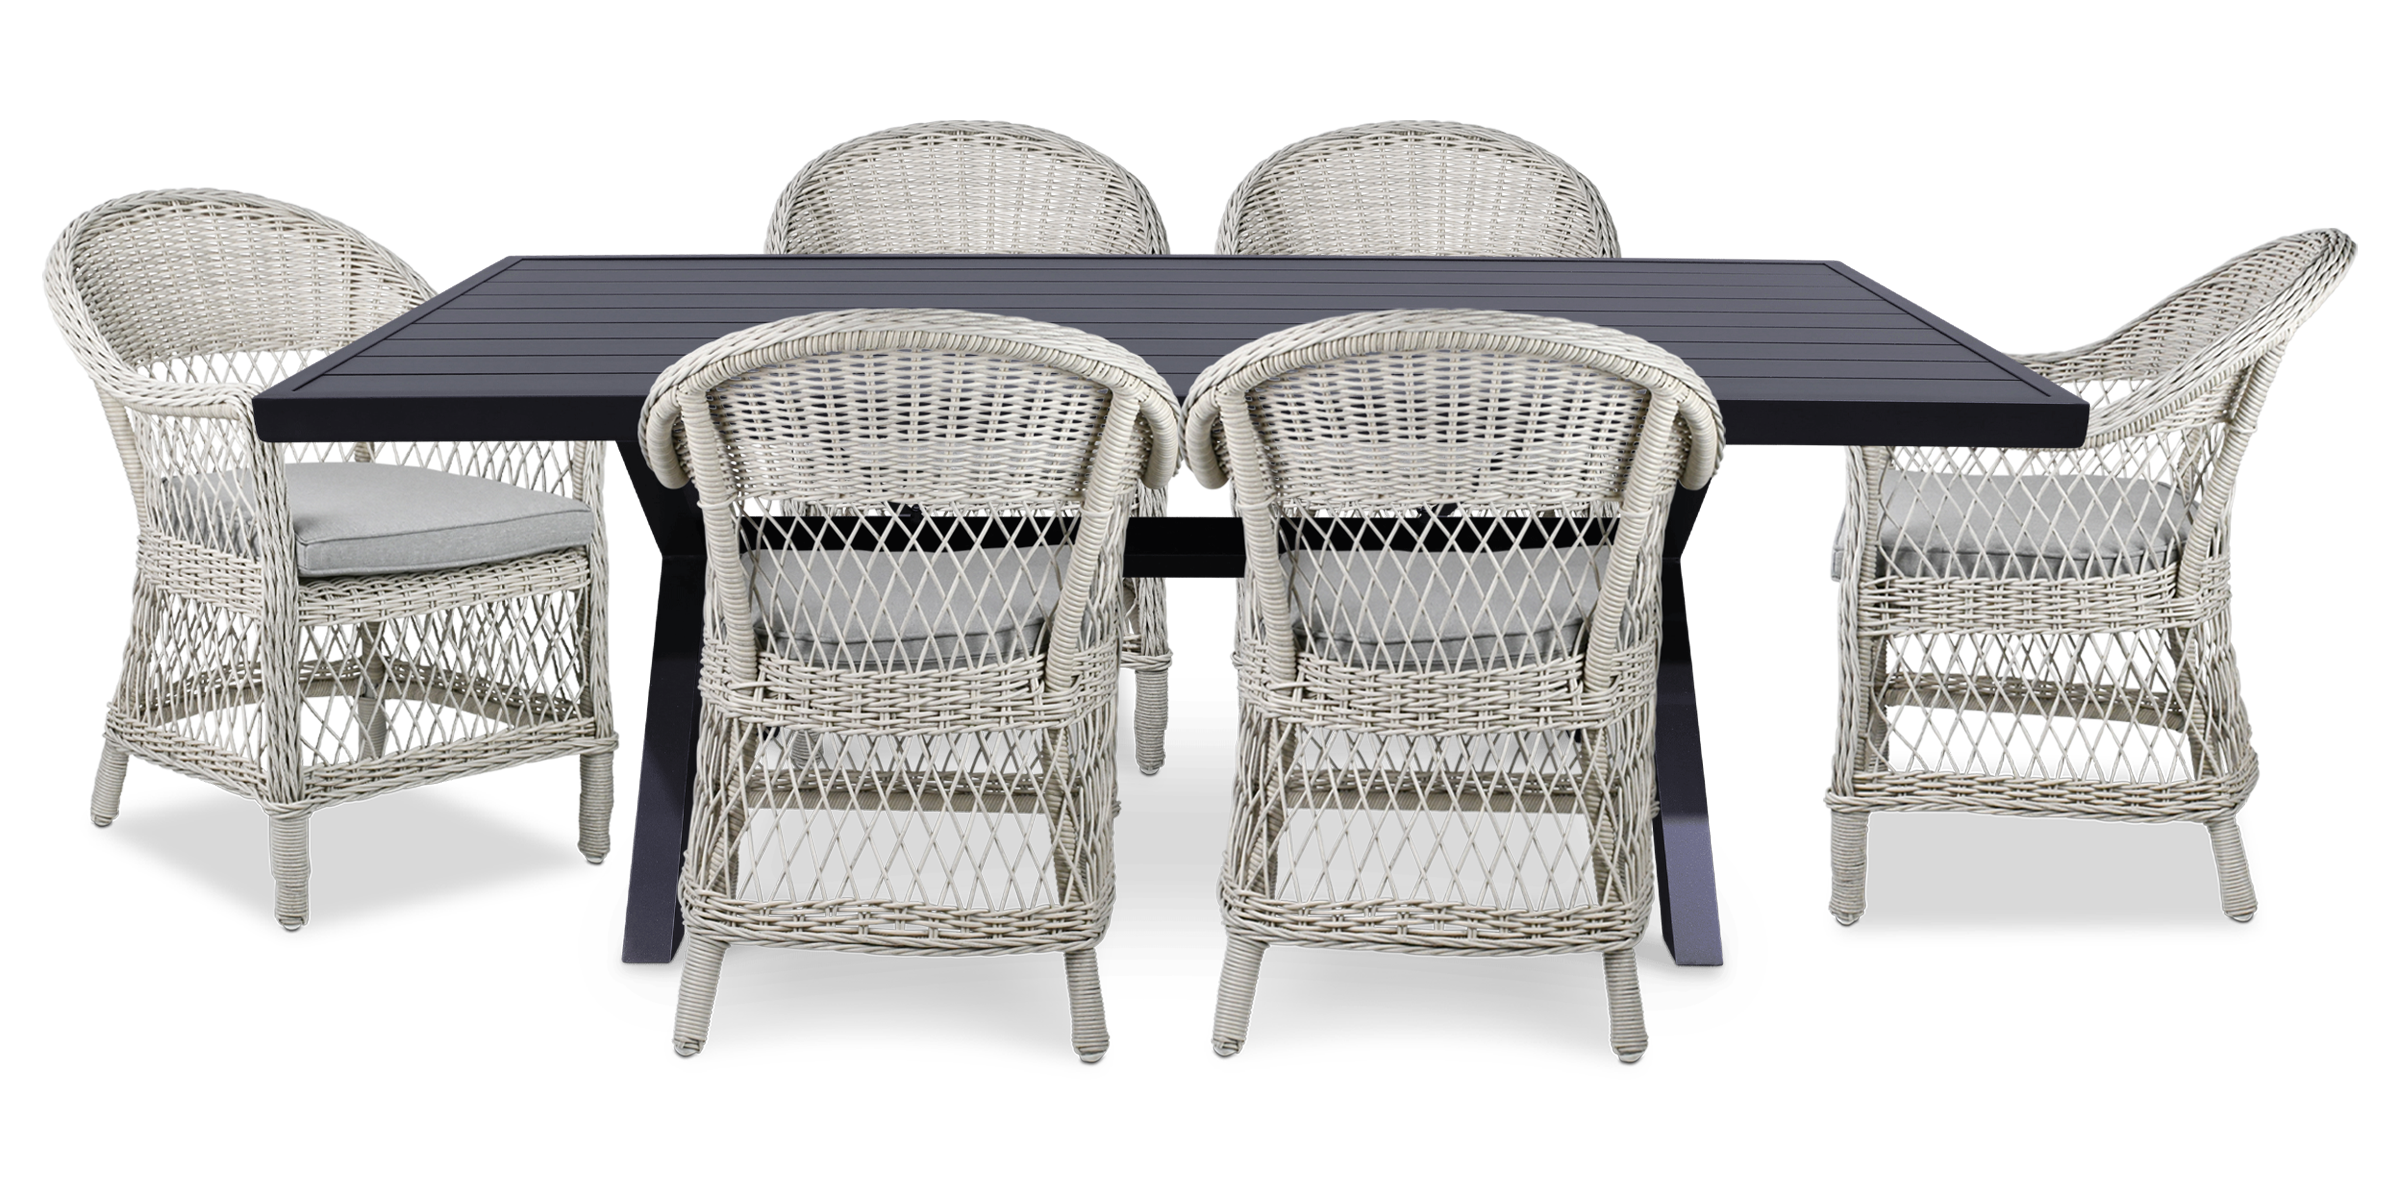 Noosa Rectangle 7 Piece Outdoor Setting in Gunmetal with Wicker Chairs